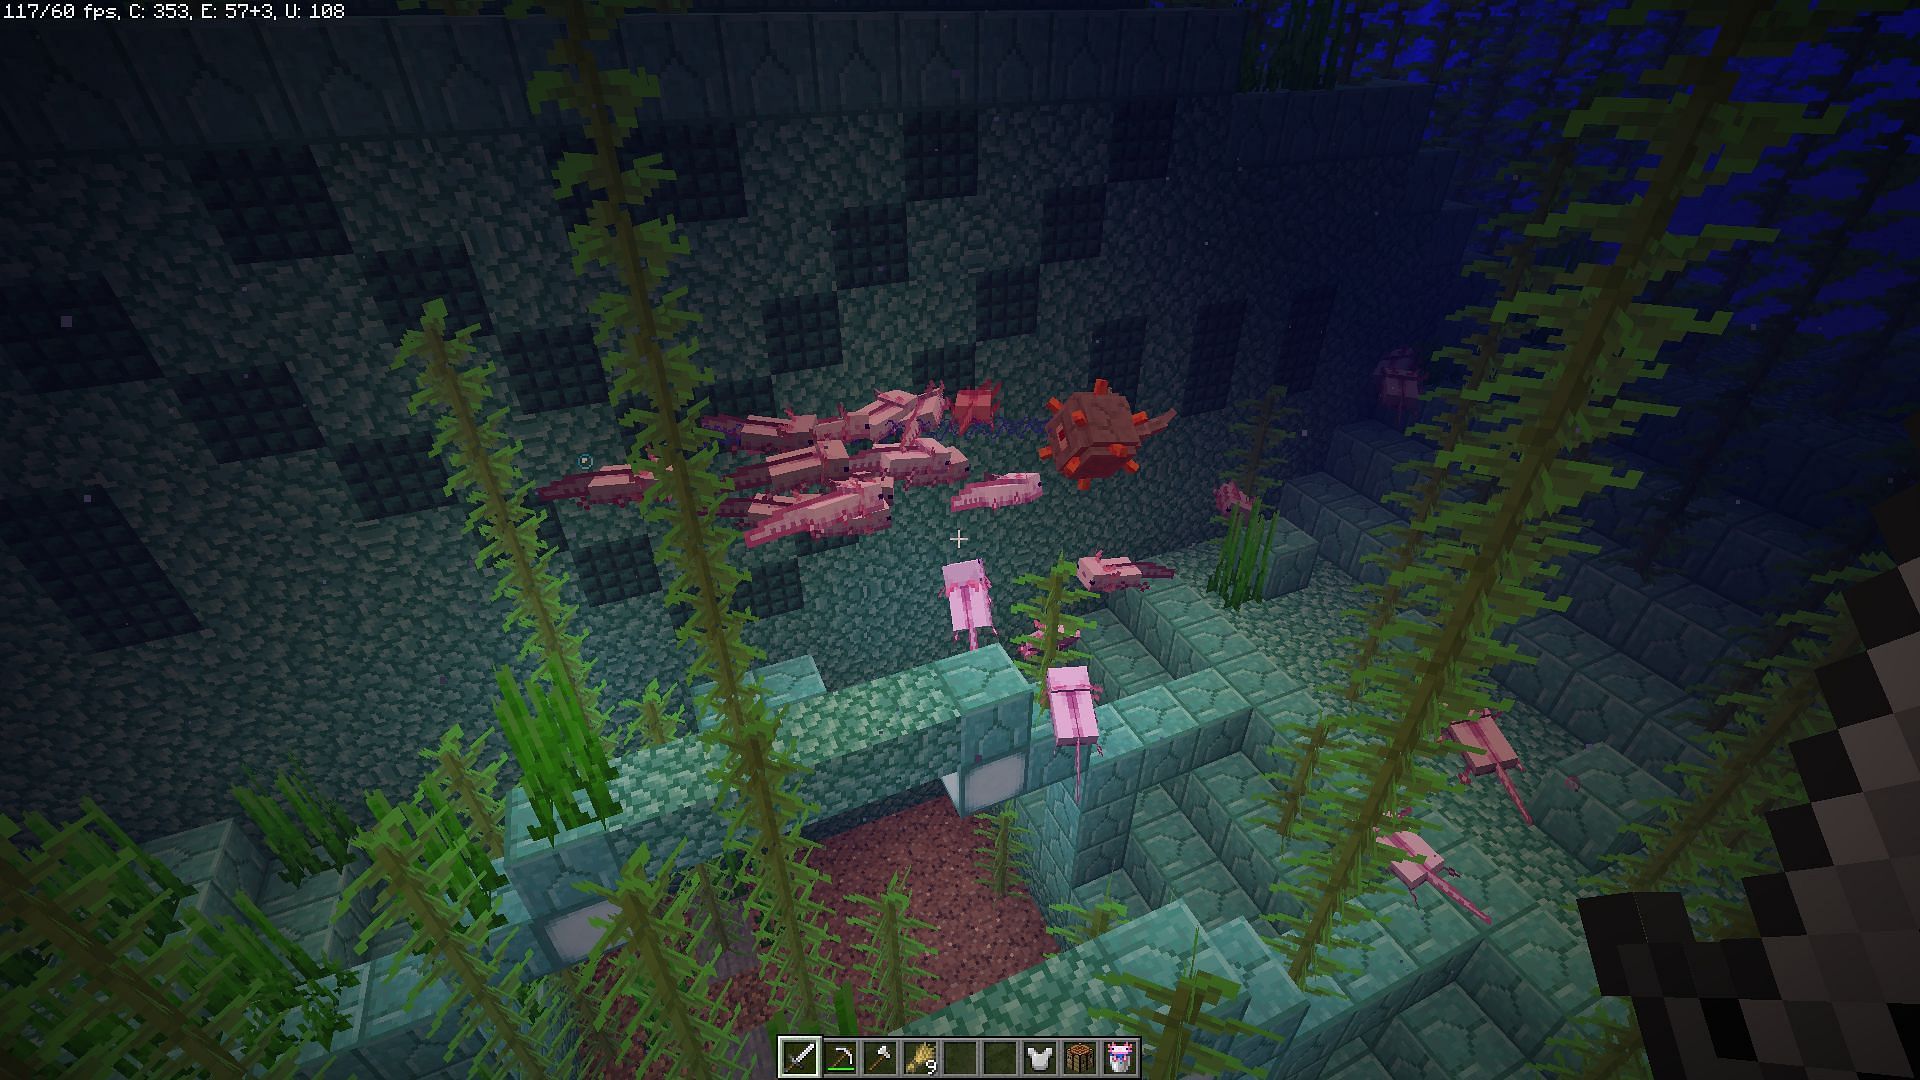 The salamander attacks hostile underwater mobs and even gives the player useful status effects in Minecraft (Image via Mojang)